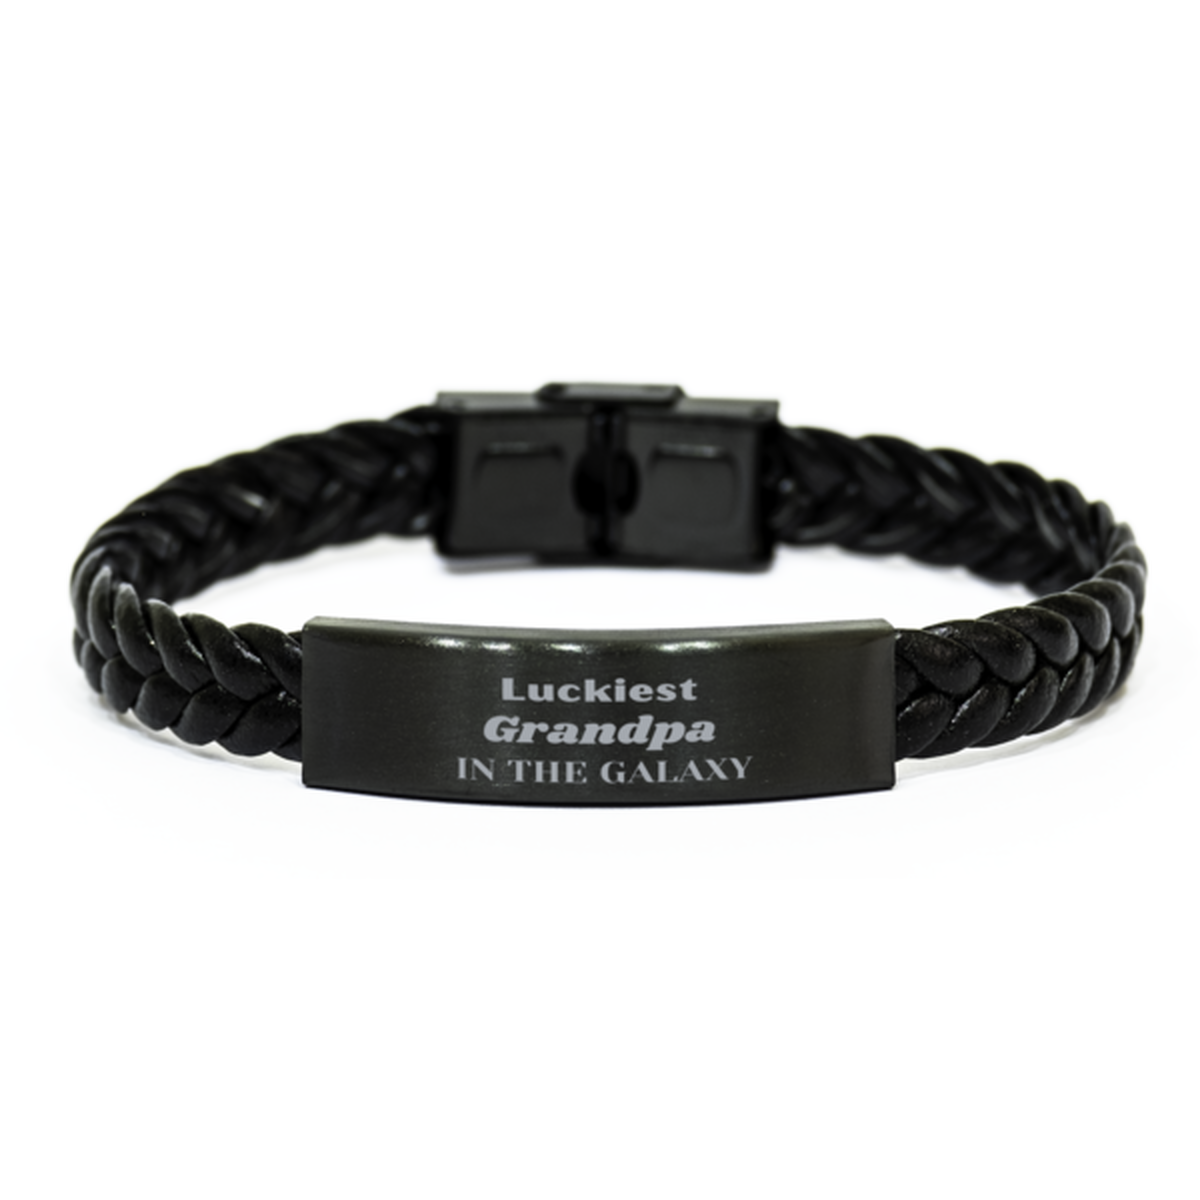 Luckiest Grandpa in the Galaxy, To My Grandpa Engraved Gifts, Christmas Grandpa Braided Leather Bracelet Gifts, X-mas Birthday Unique Gifts For Grandpa Men Women